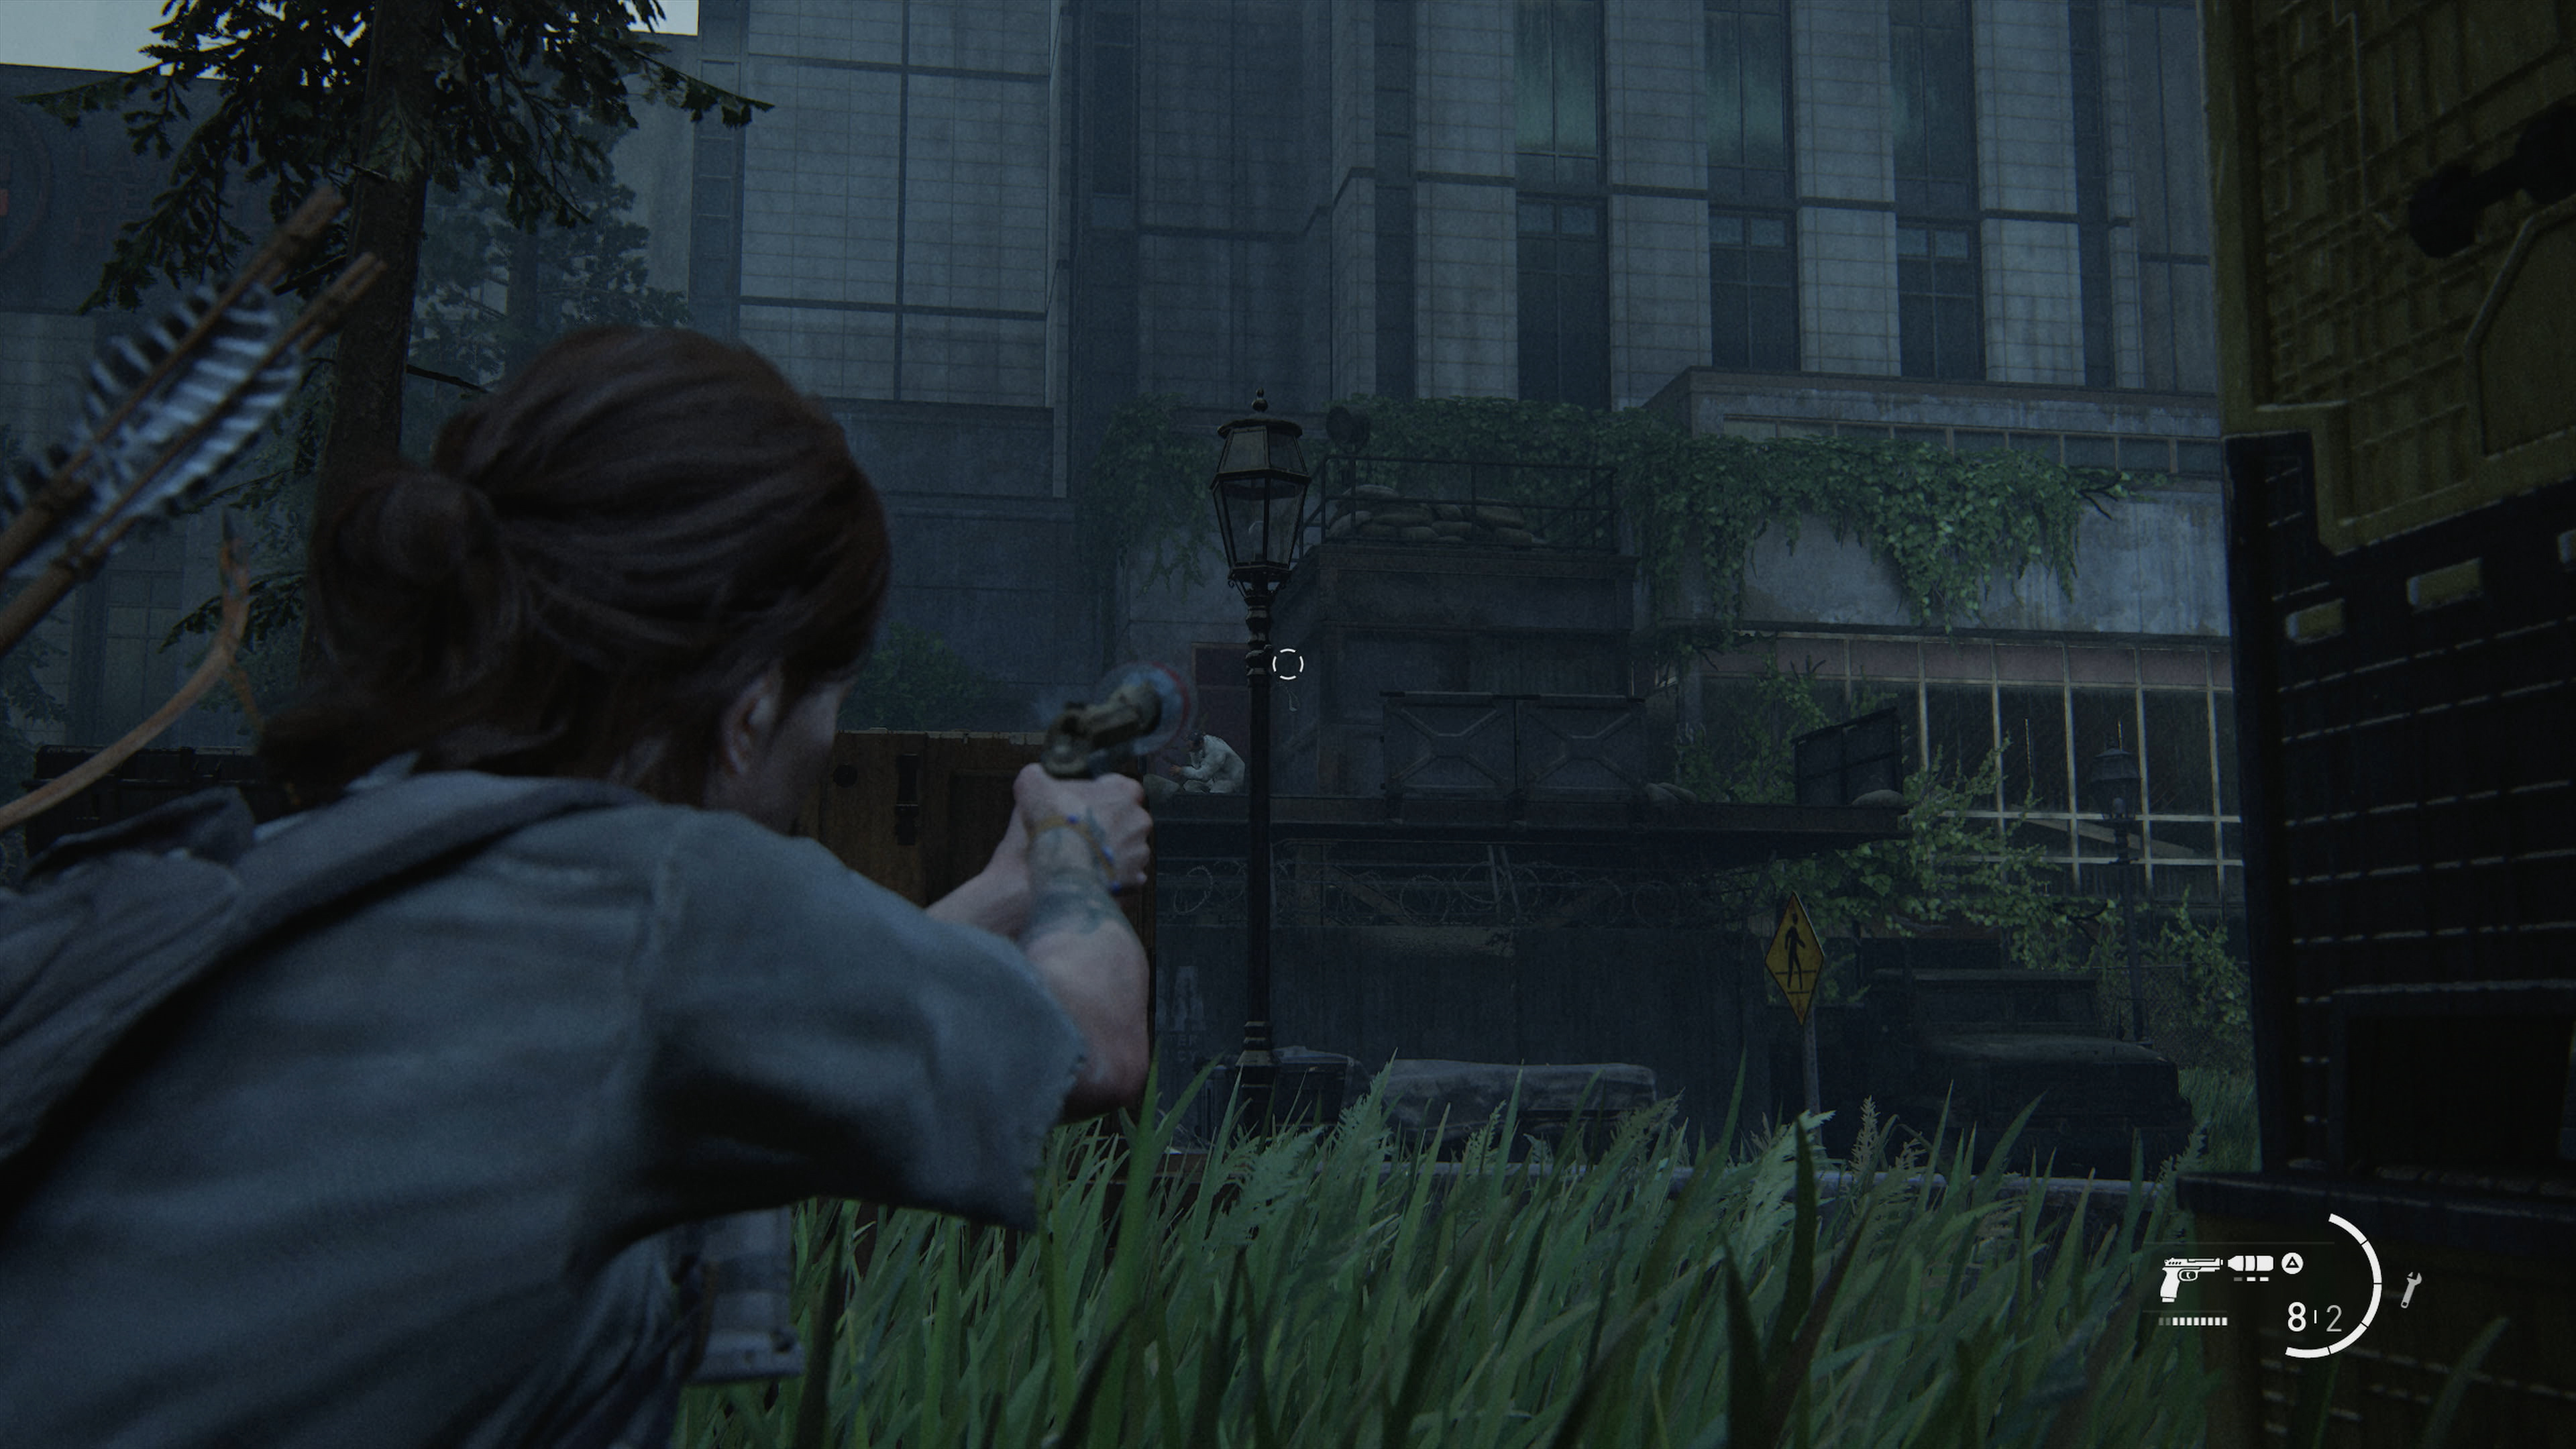 THE LAST OF US 2: FULL GAMEPLAY DEMO FIRST LOOK - No Commentary 